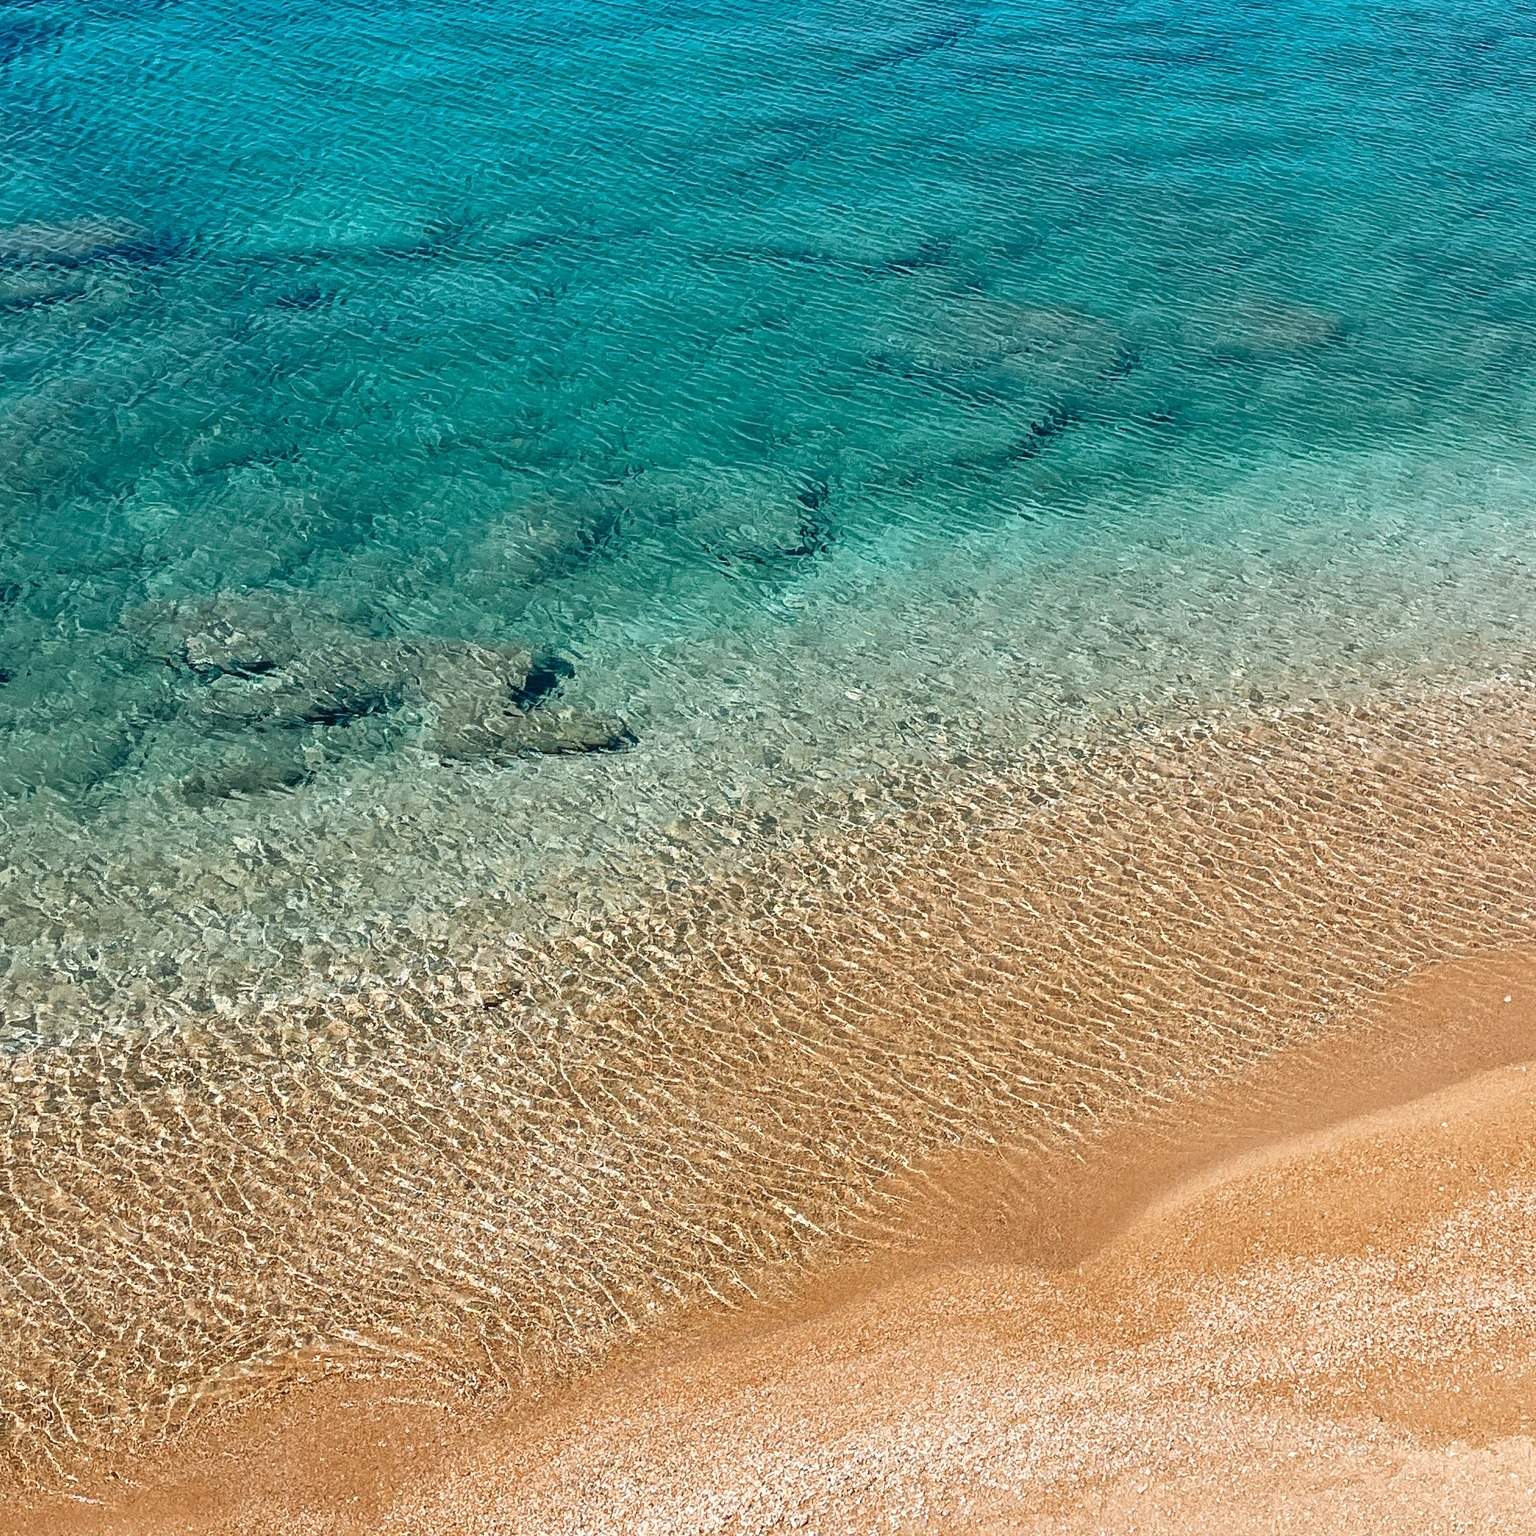 Where the sand meets the sea, a moment of bliss unfolds. Feel the grains beneath your toes and let the gentle waves caress your soul. ✨
.
#amalgamhomes #artofcomfort #greece #visitgreece #greekislands #cyclades #greekislands #paros #naxos #mykonos #tinos #ampelas #kastraki #triantaros #travel #wanderlust #greeksummer #discovergreece